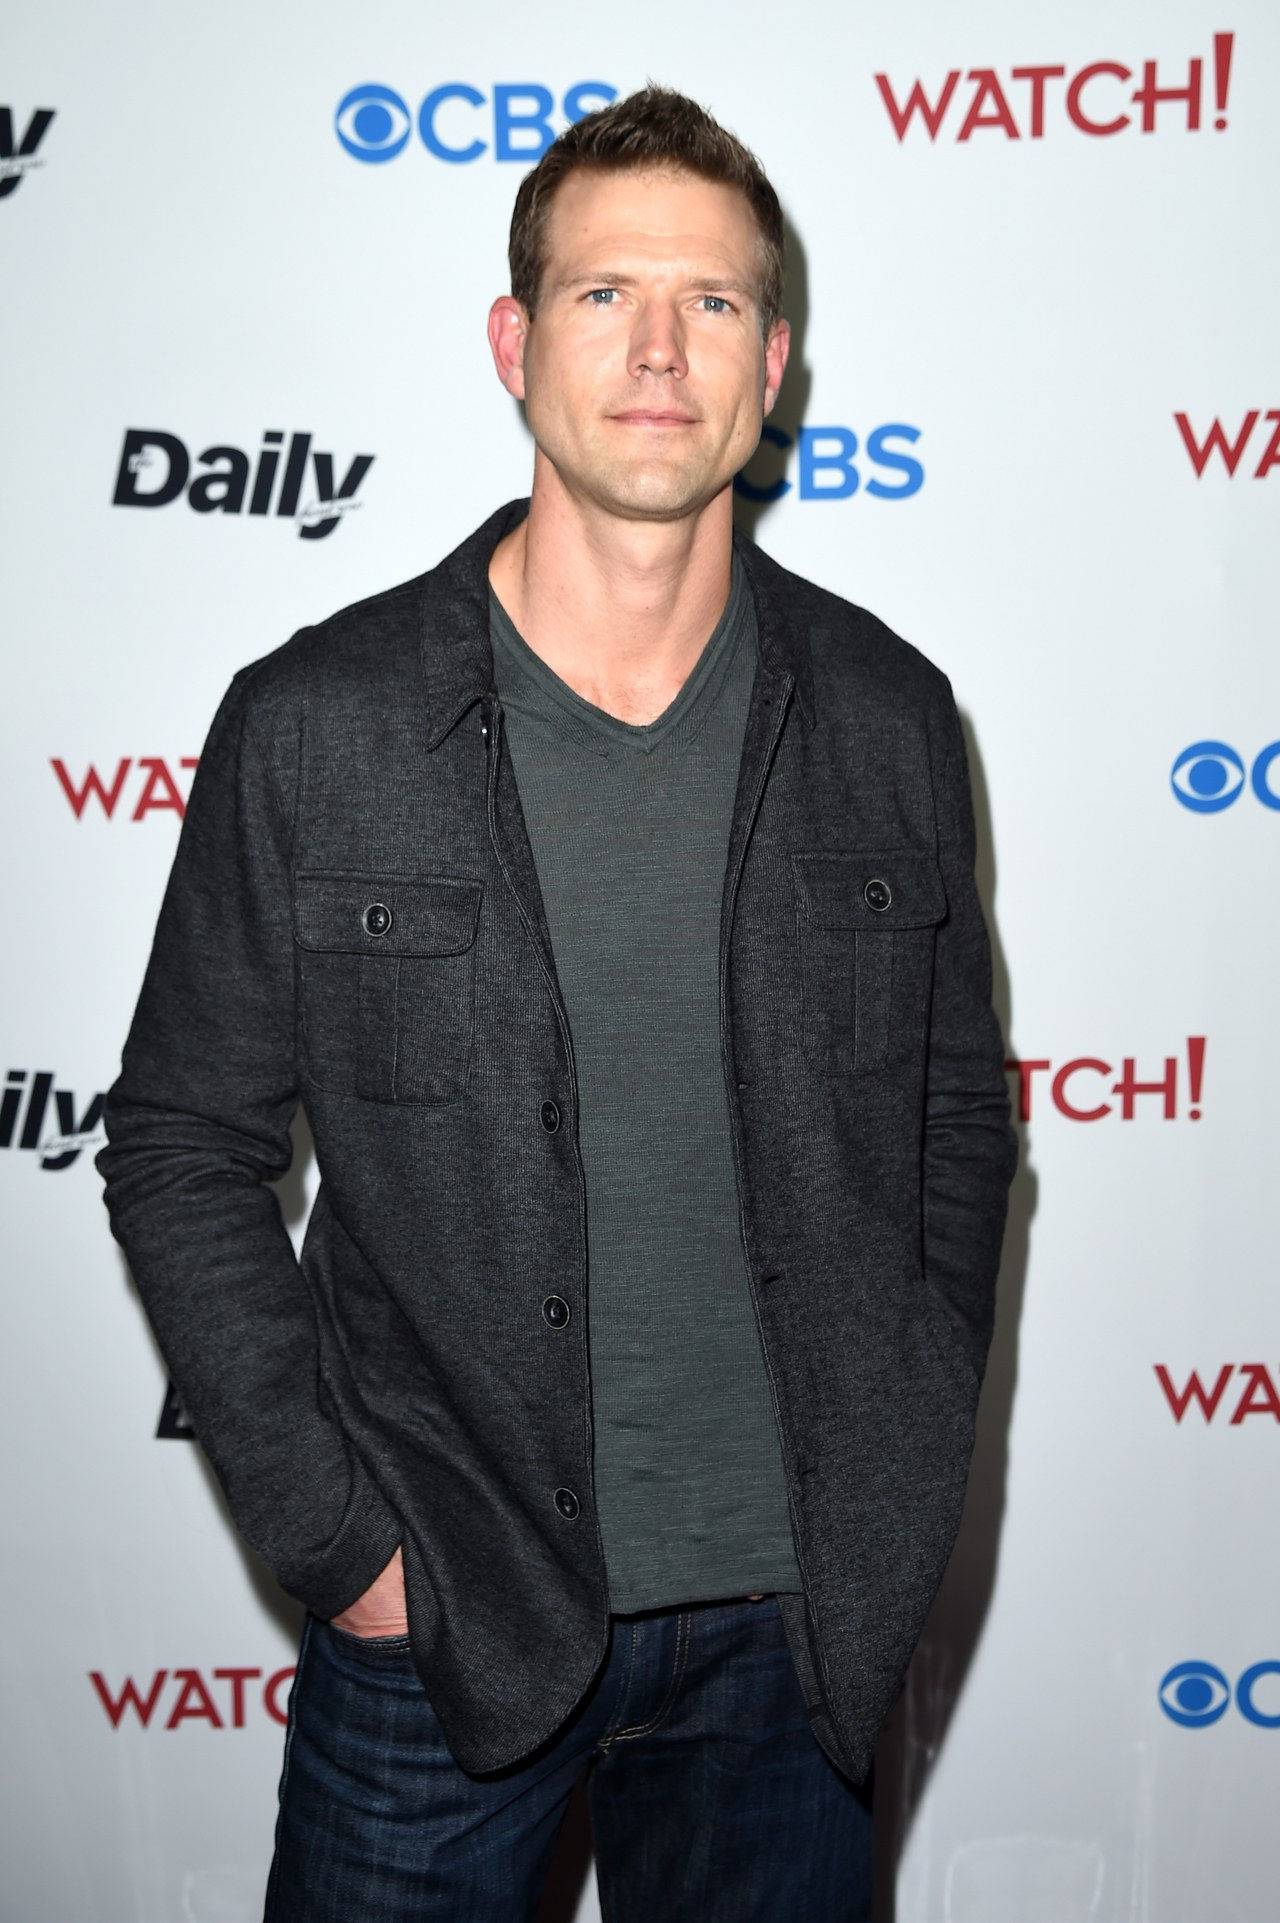 Das Daily Front Row Celebrates The 10th Anniversary Of CBS Watch! Magazine - Arrivals